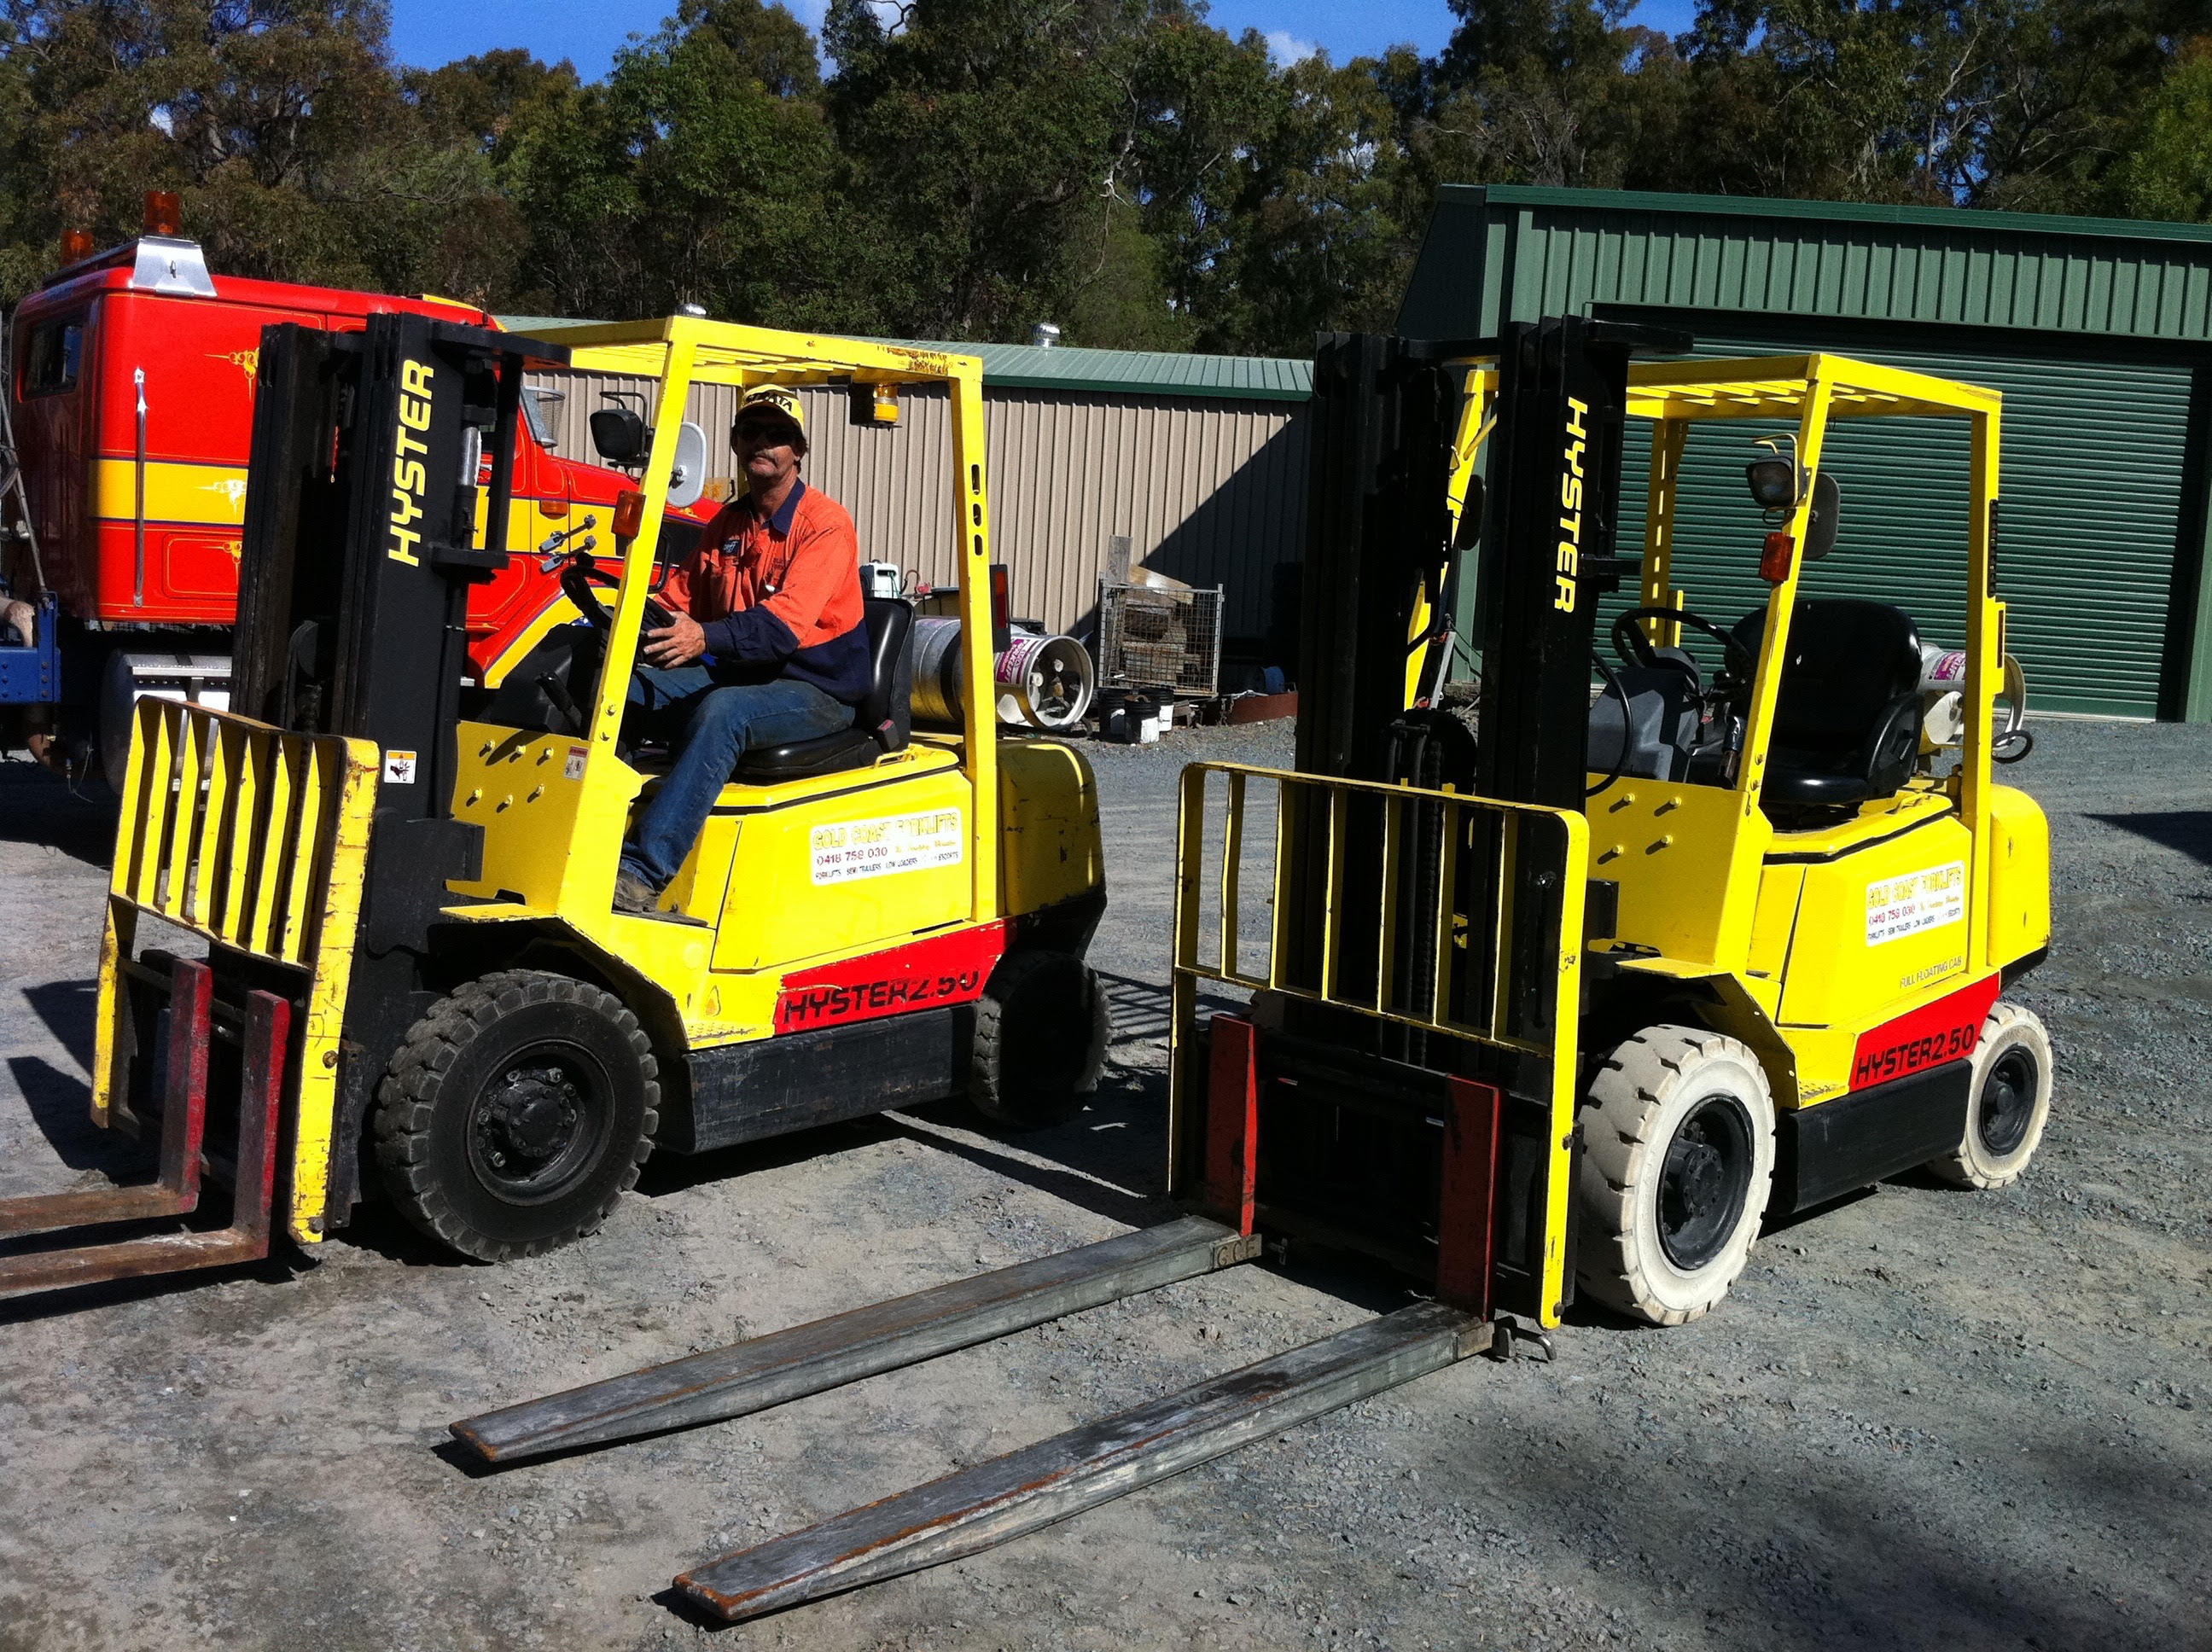 Some Of Our 2.5 Ton Container Entry Hyster Forklifts Non Marking Tyres {white Walls} Or Black Standard Punchure Proof